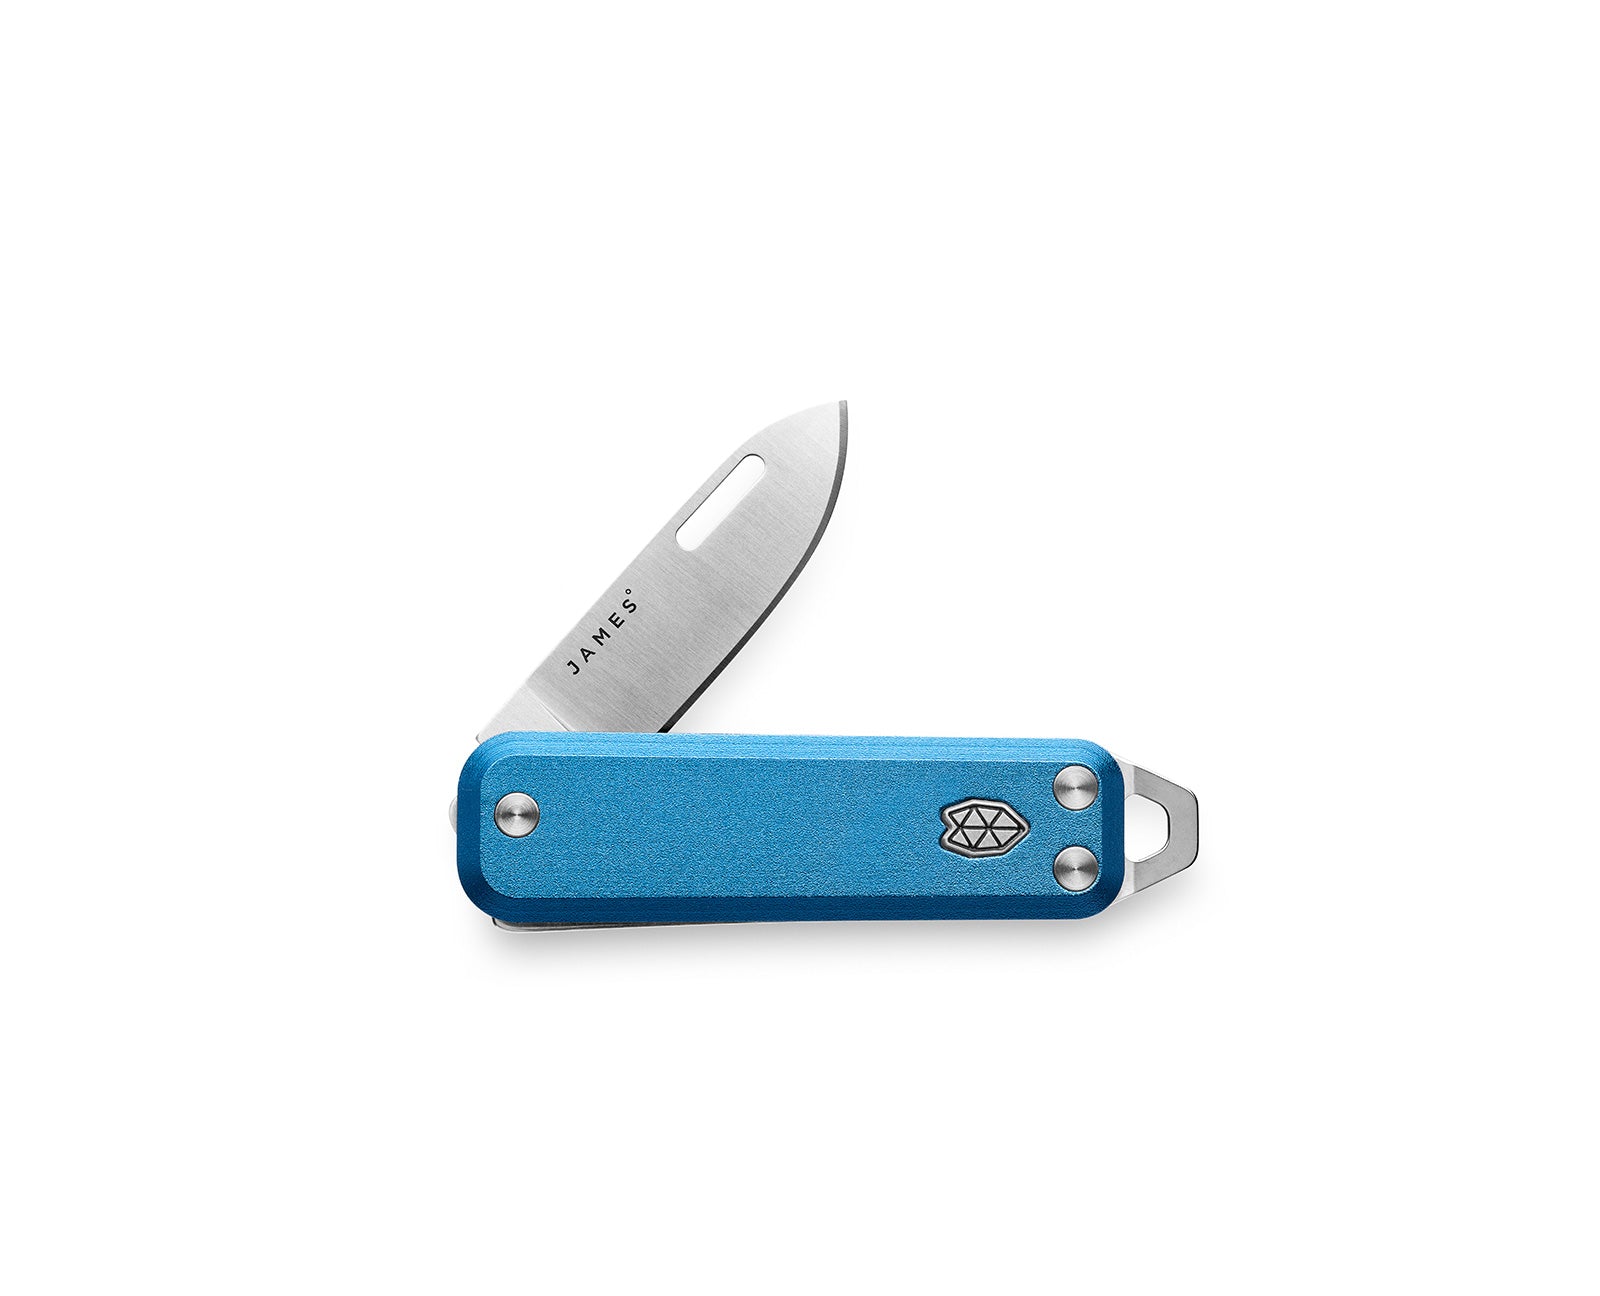 The Elko knife with cerulean handle and stainless steel blade.